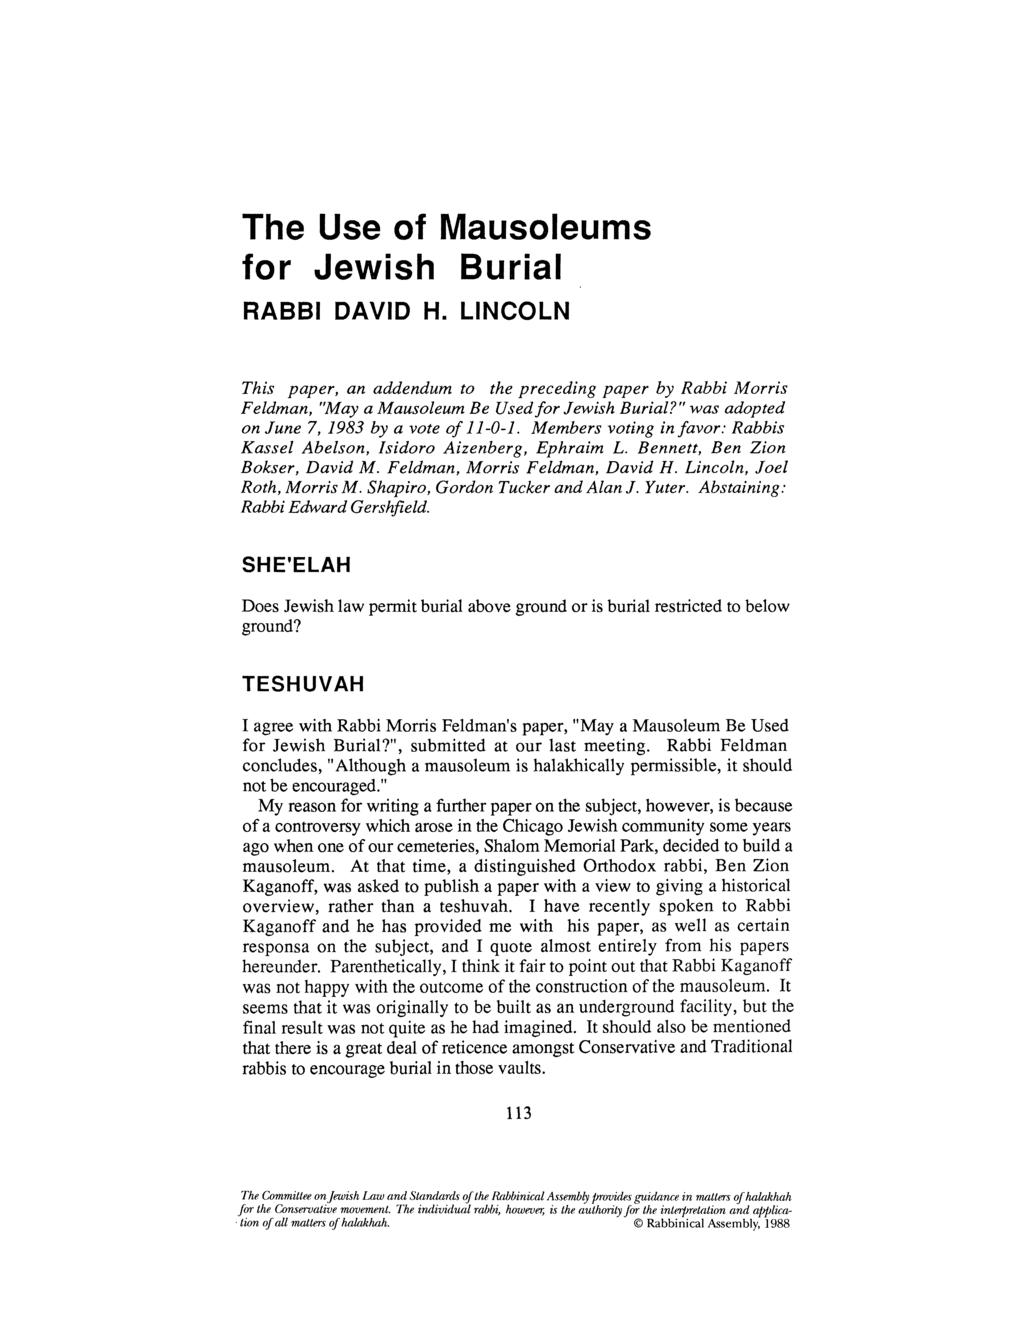 The Use of Mausoleums for Jewish Burial RABBI DAVID H. LINCOLN This paper, an addendum to the preceding paper by Rabbi Morris Feldman, "May a Mausoleum Be Used for Jewish Burial?